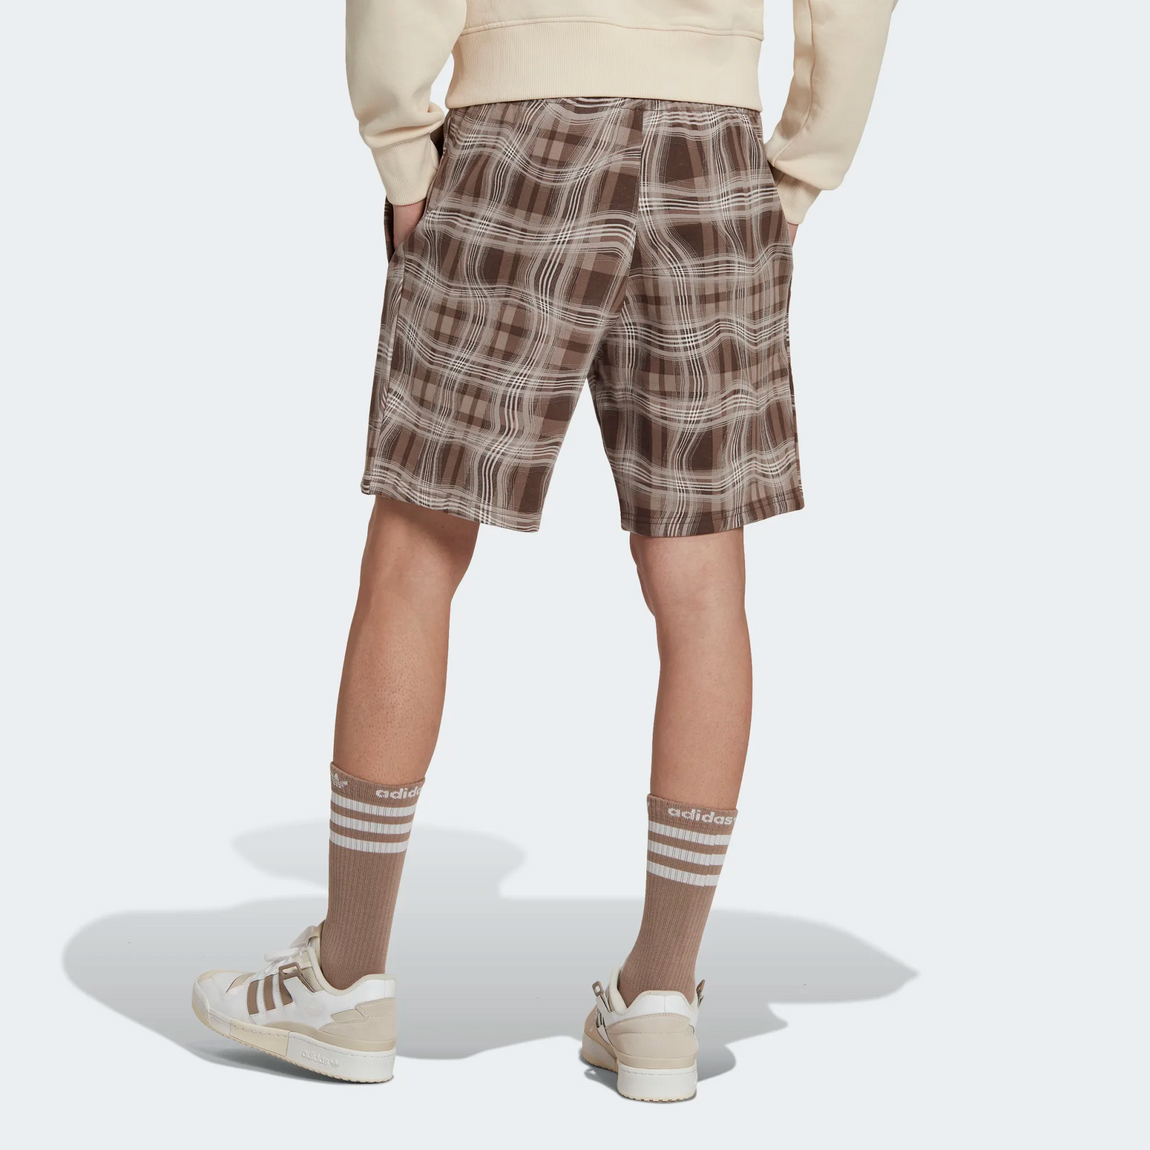 Adidas Reveal Allover Print Shorts (Chalky Brown) - Adidas Reveal Allover Print Shorts (Chalky Brown) - 